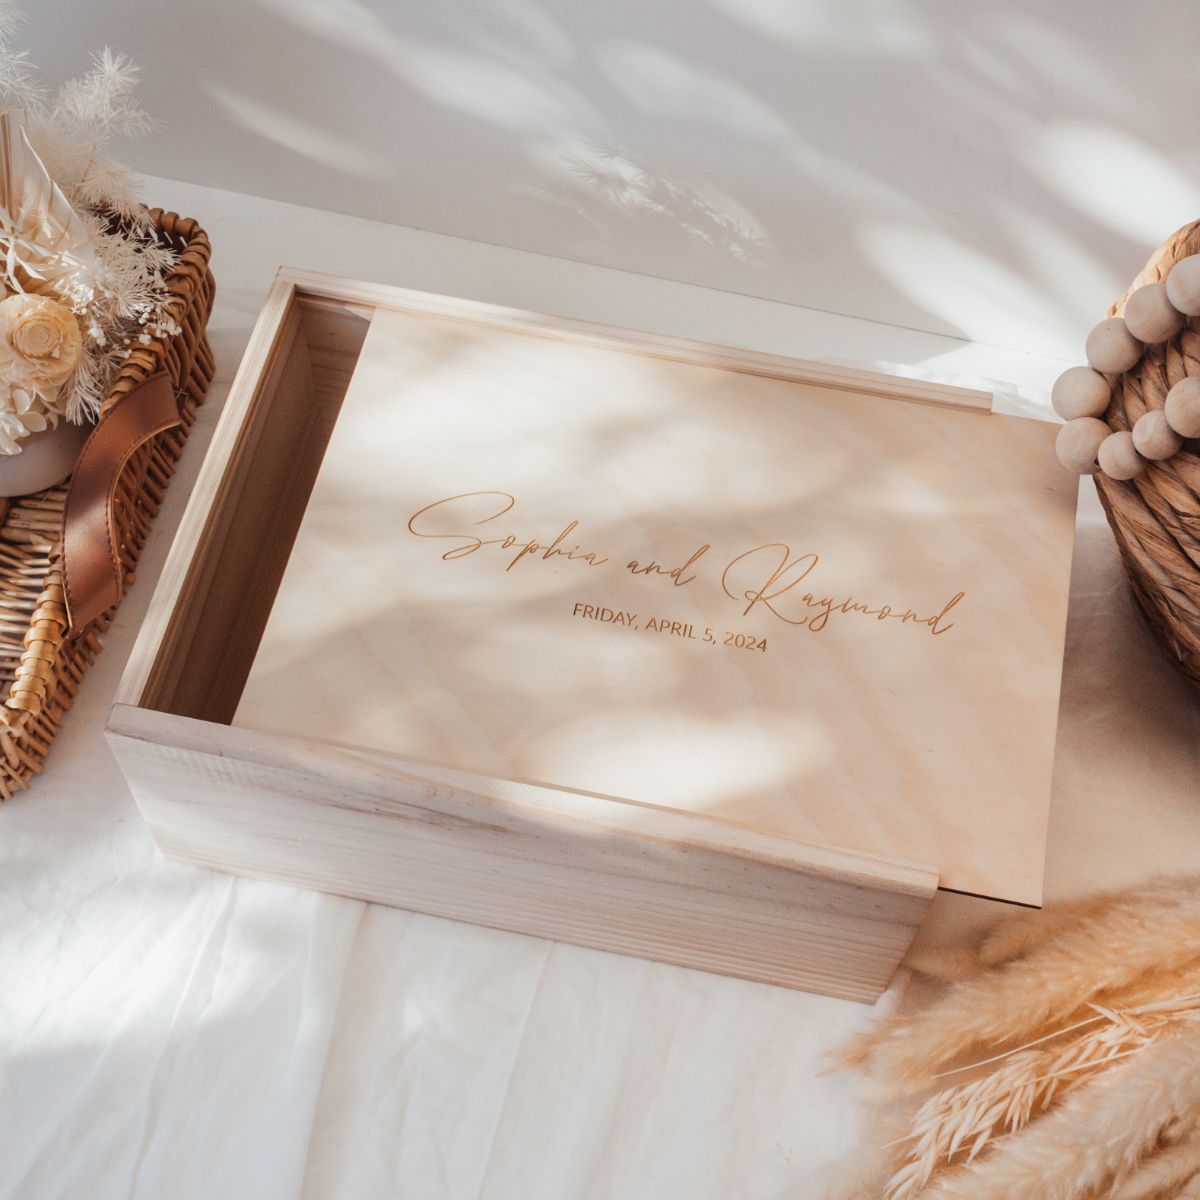 This is a large wooden wedding keepsake box with a cursive text design and a date of the wedding underneath